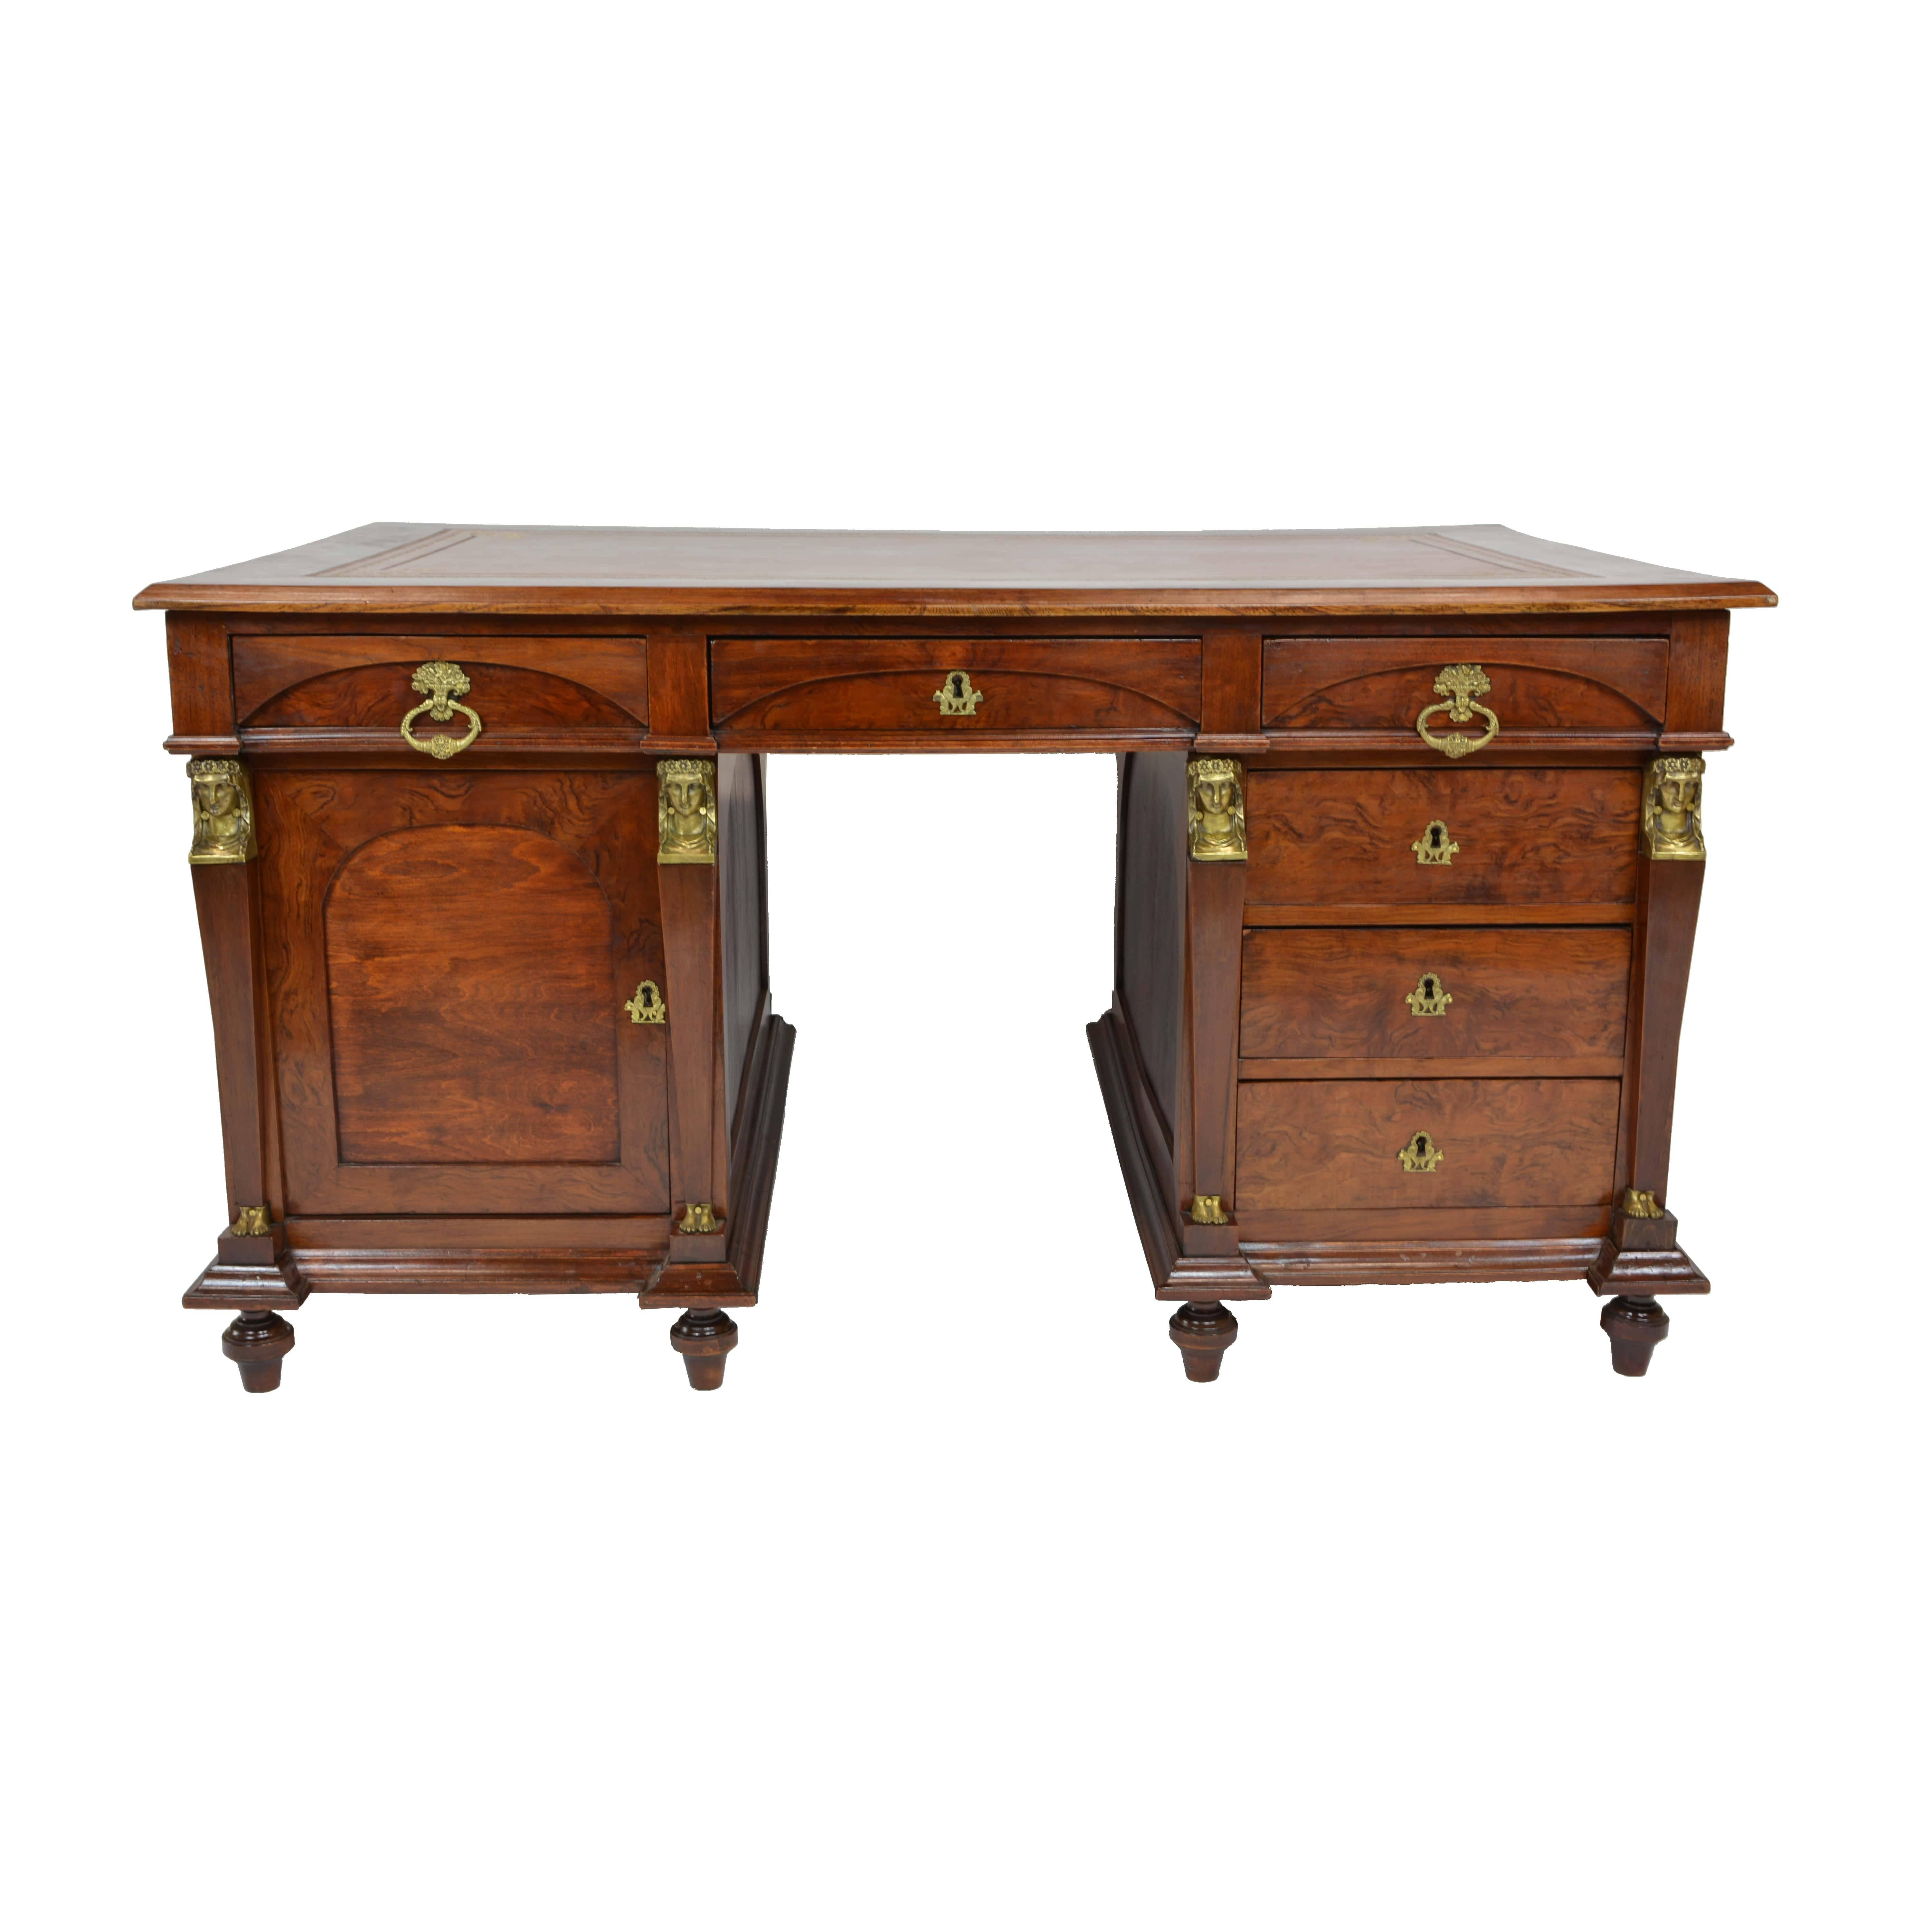 Early 19th Century Empire Style Leather Top Desk 2